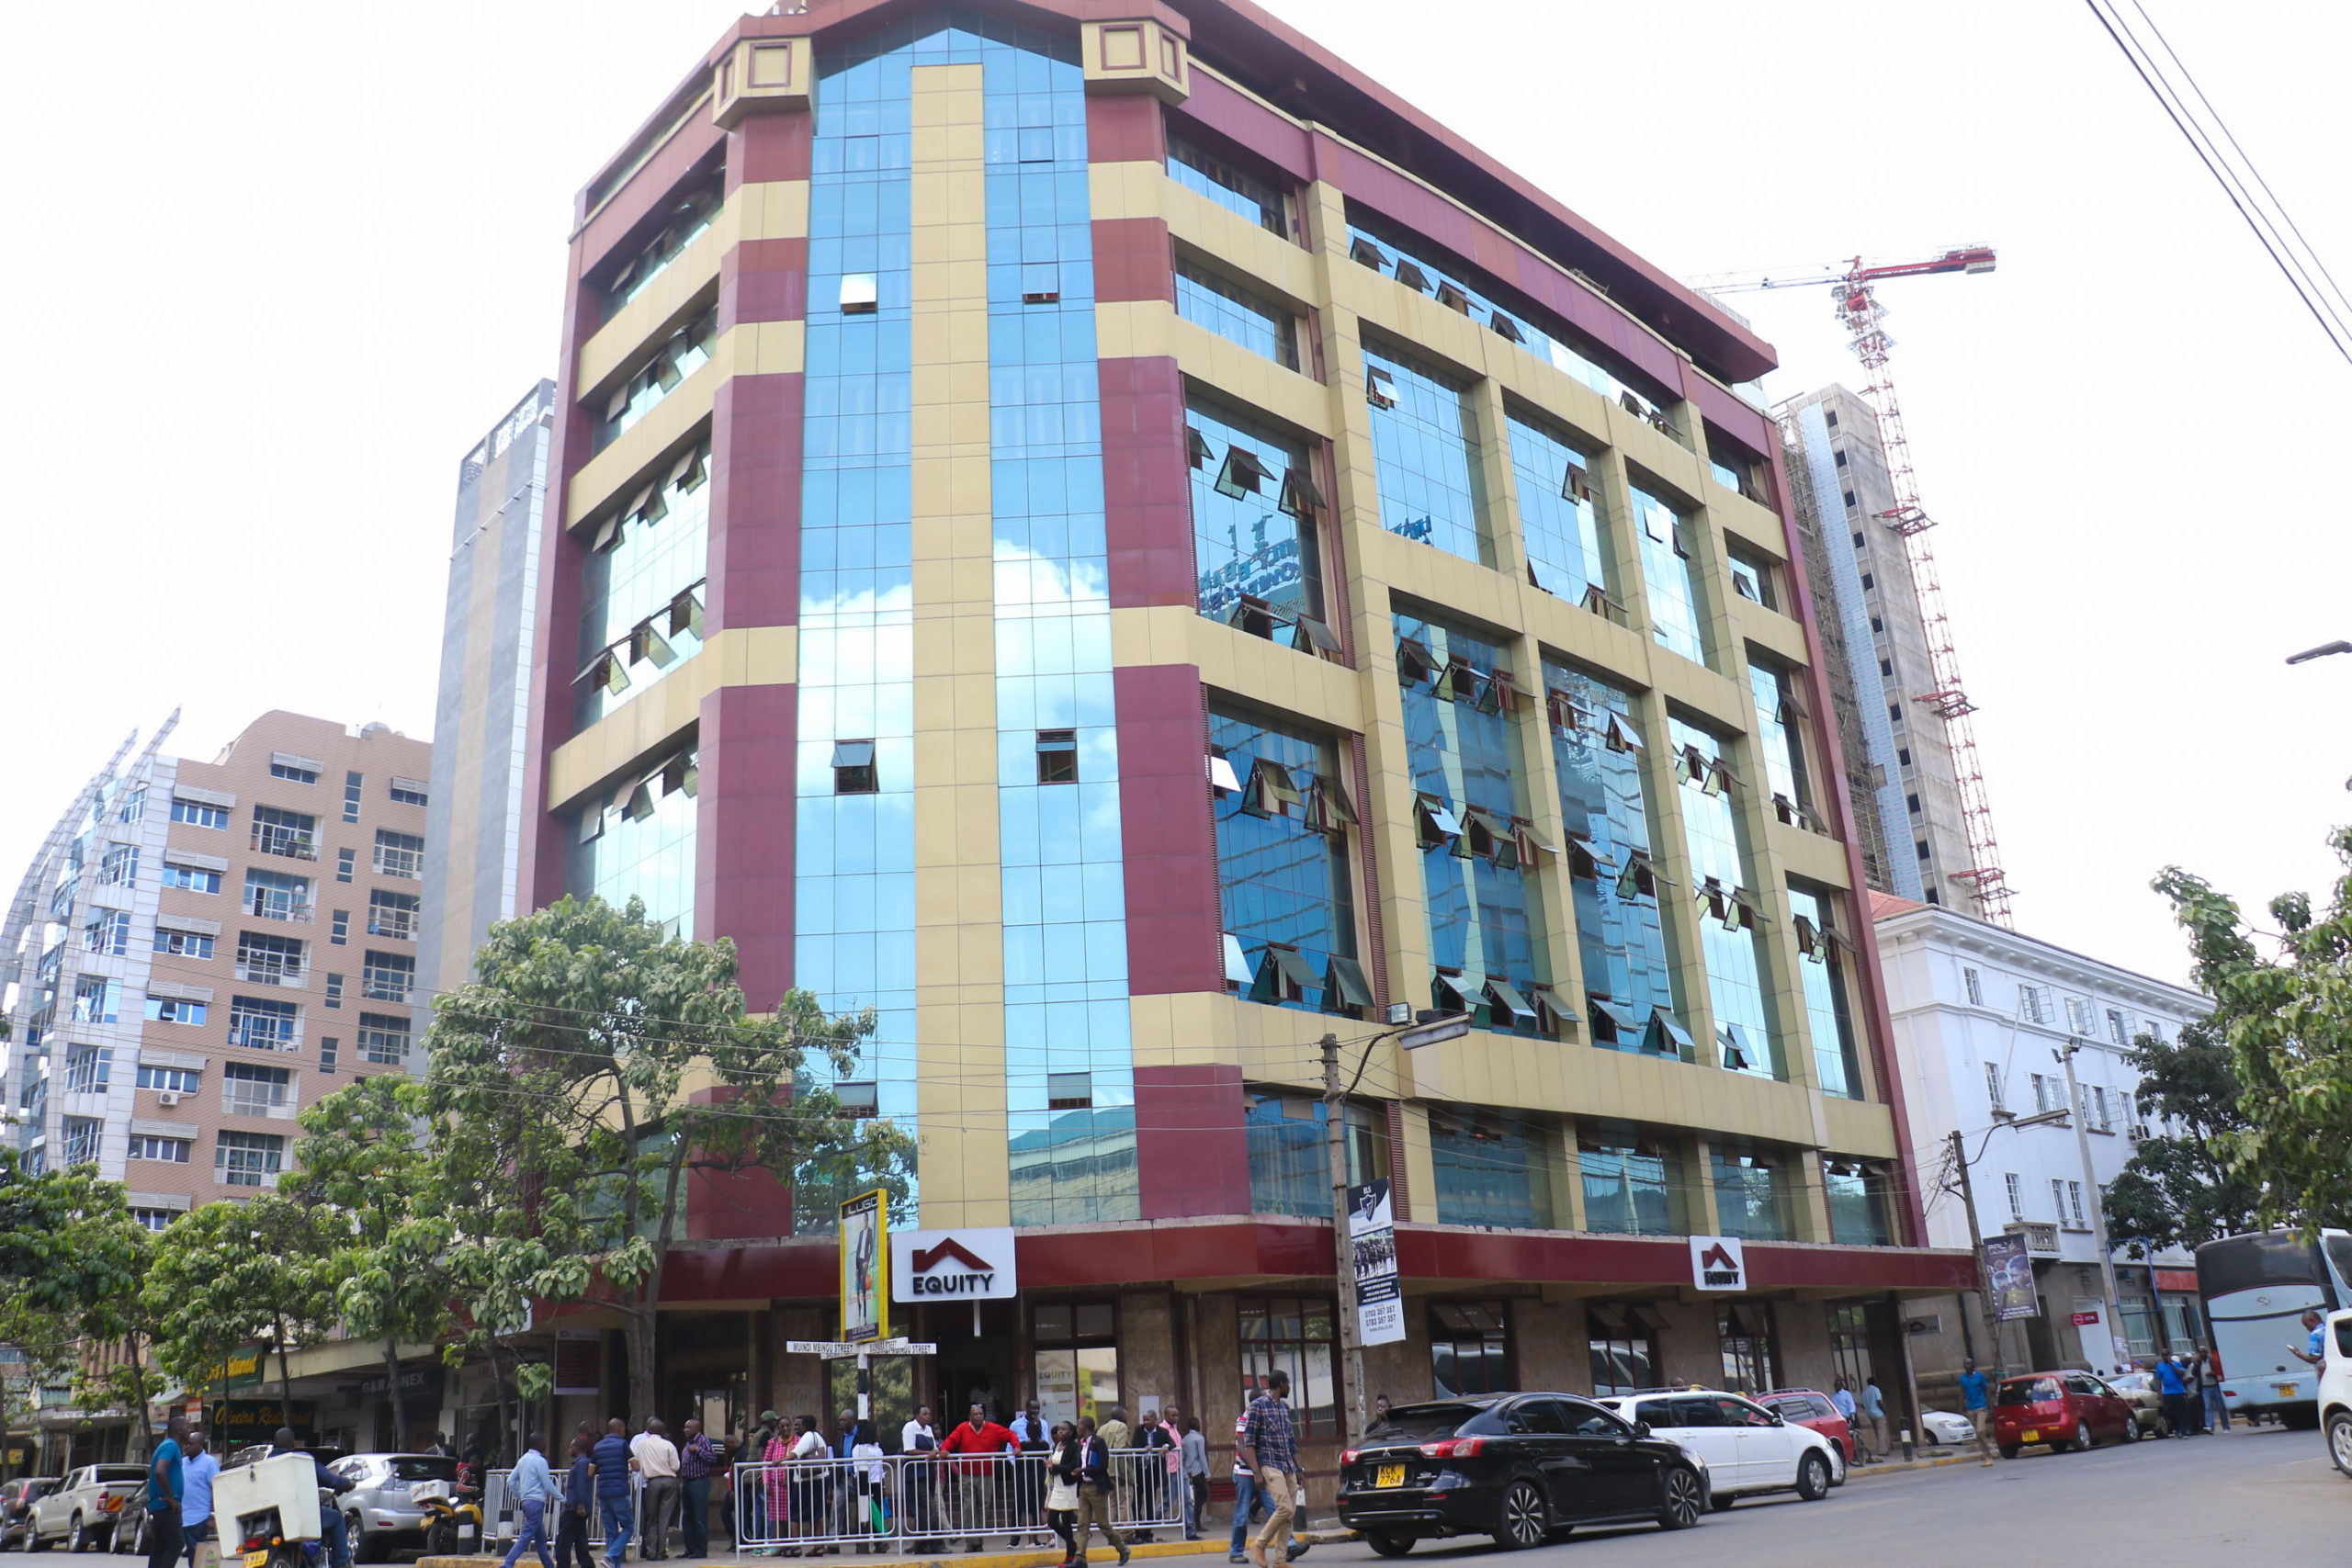 Equity Bank Congo and Banque Commerciale Du Congo (BCDC) receive regulatory approval for merger